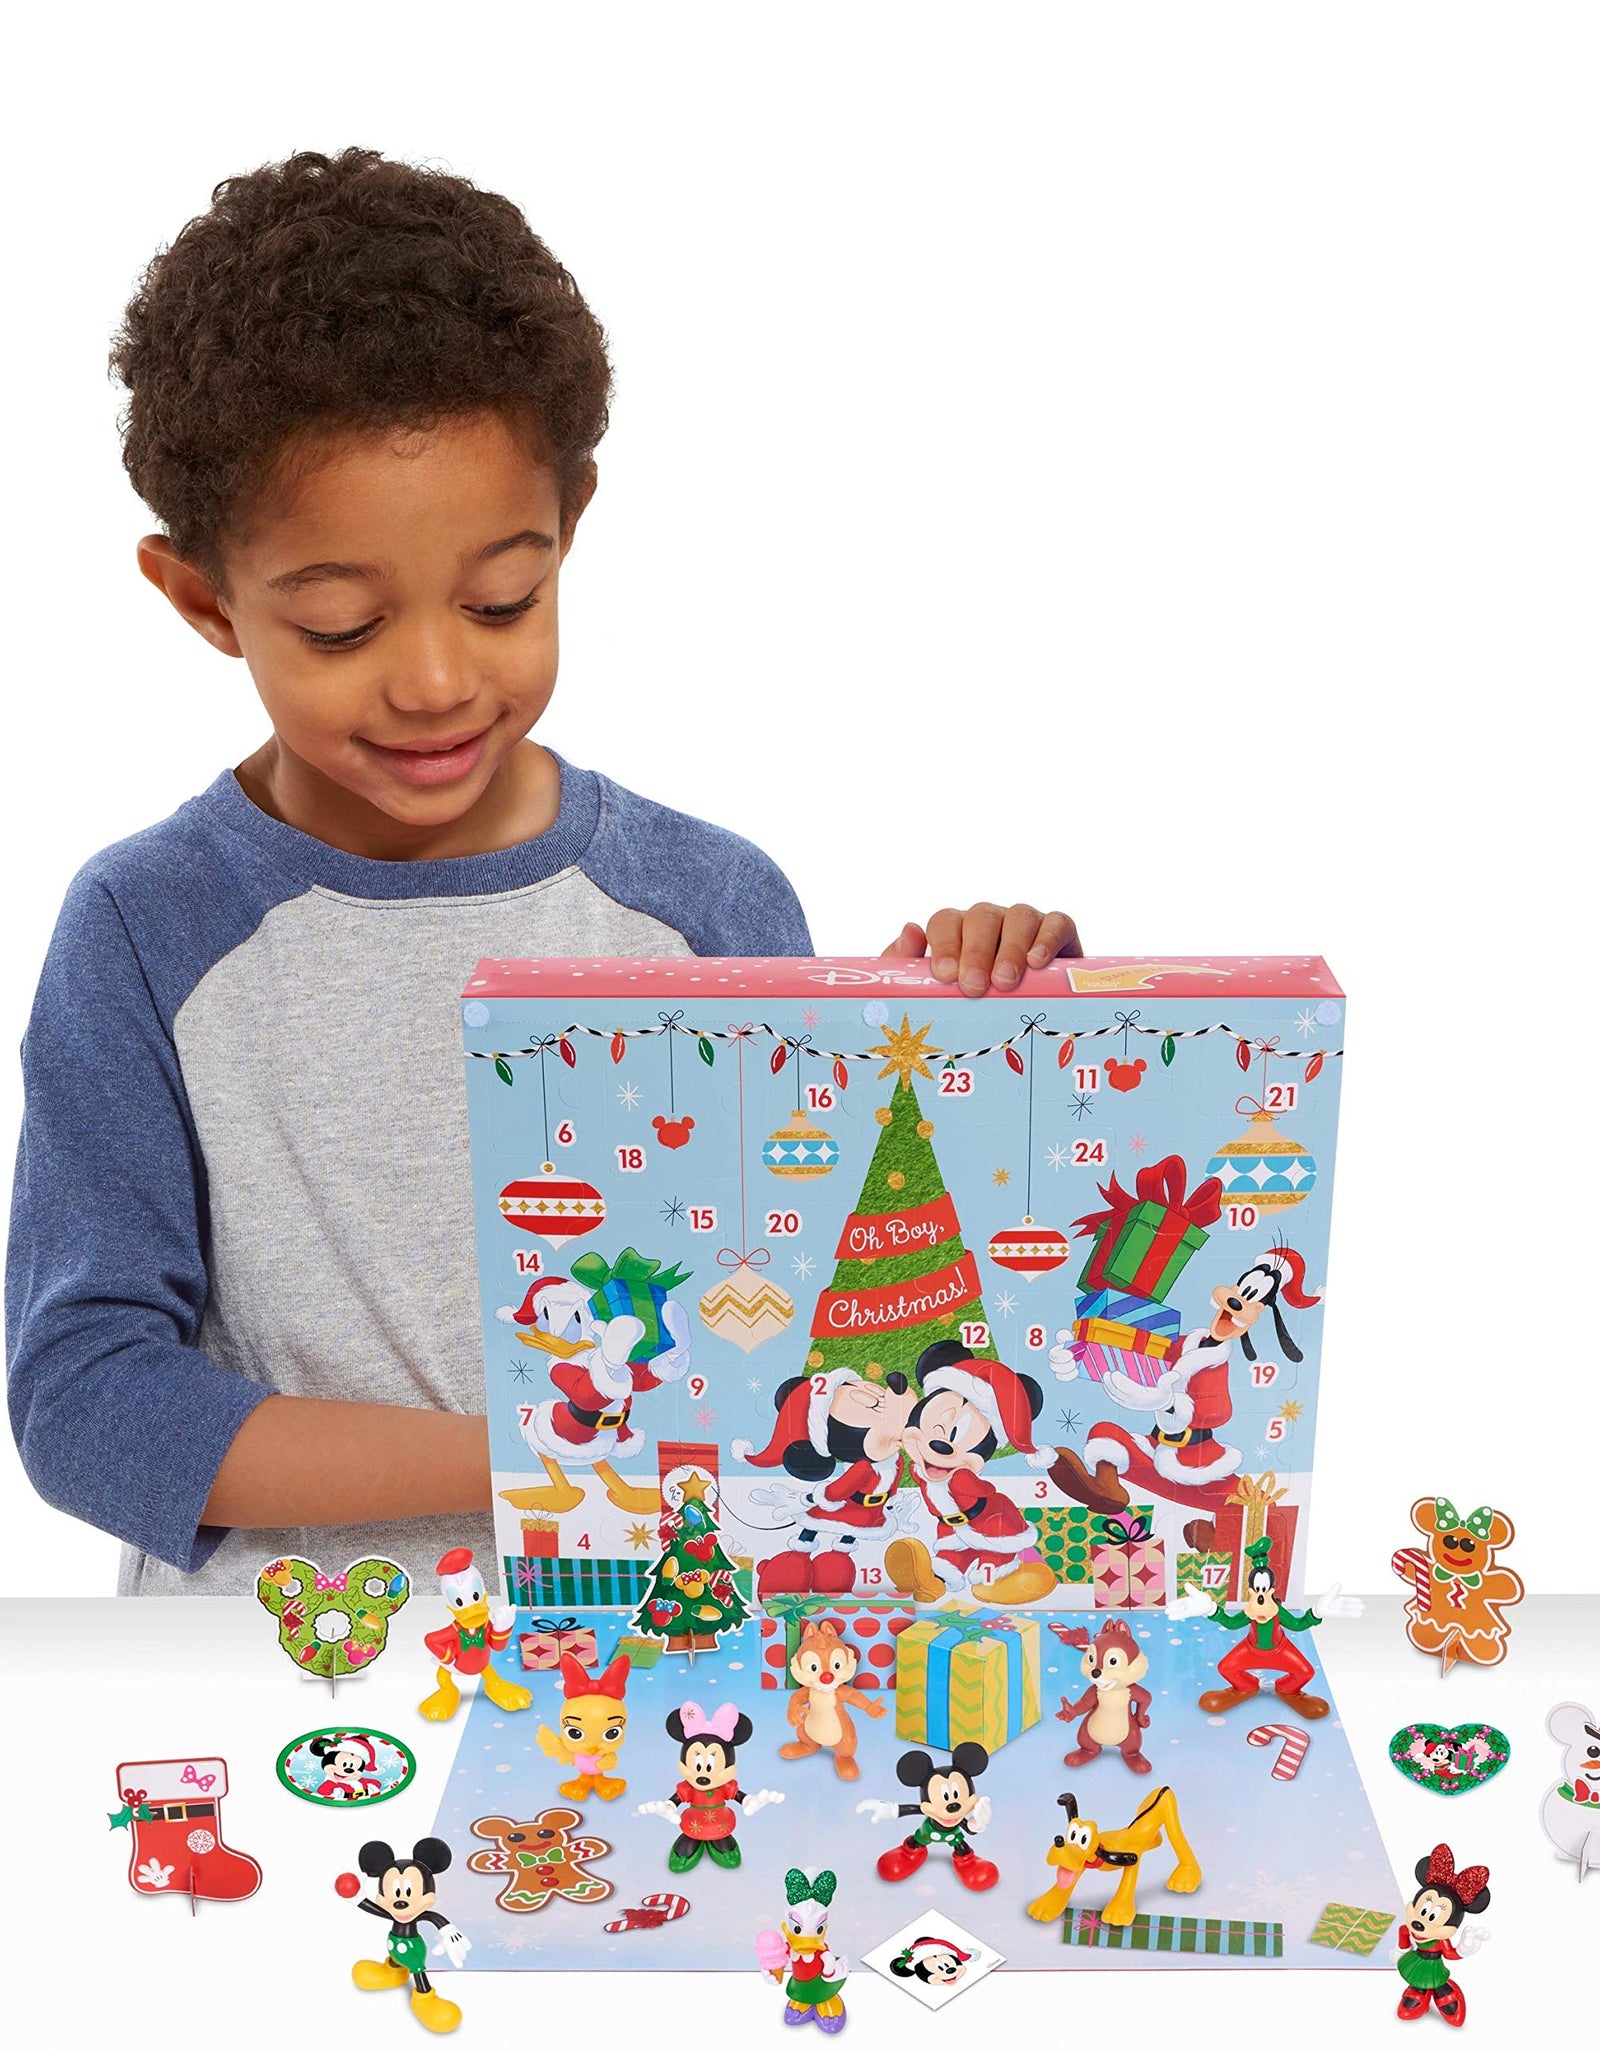 Disney Classic Advent Calendar, 32 Pieces, Figures, Decorations, and Stickers, by Just Play